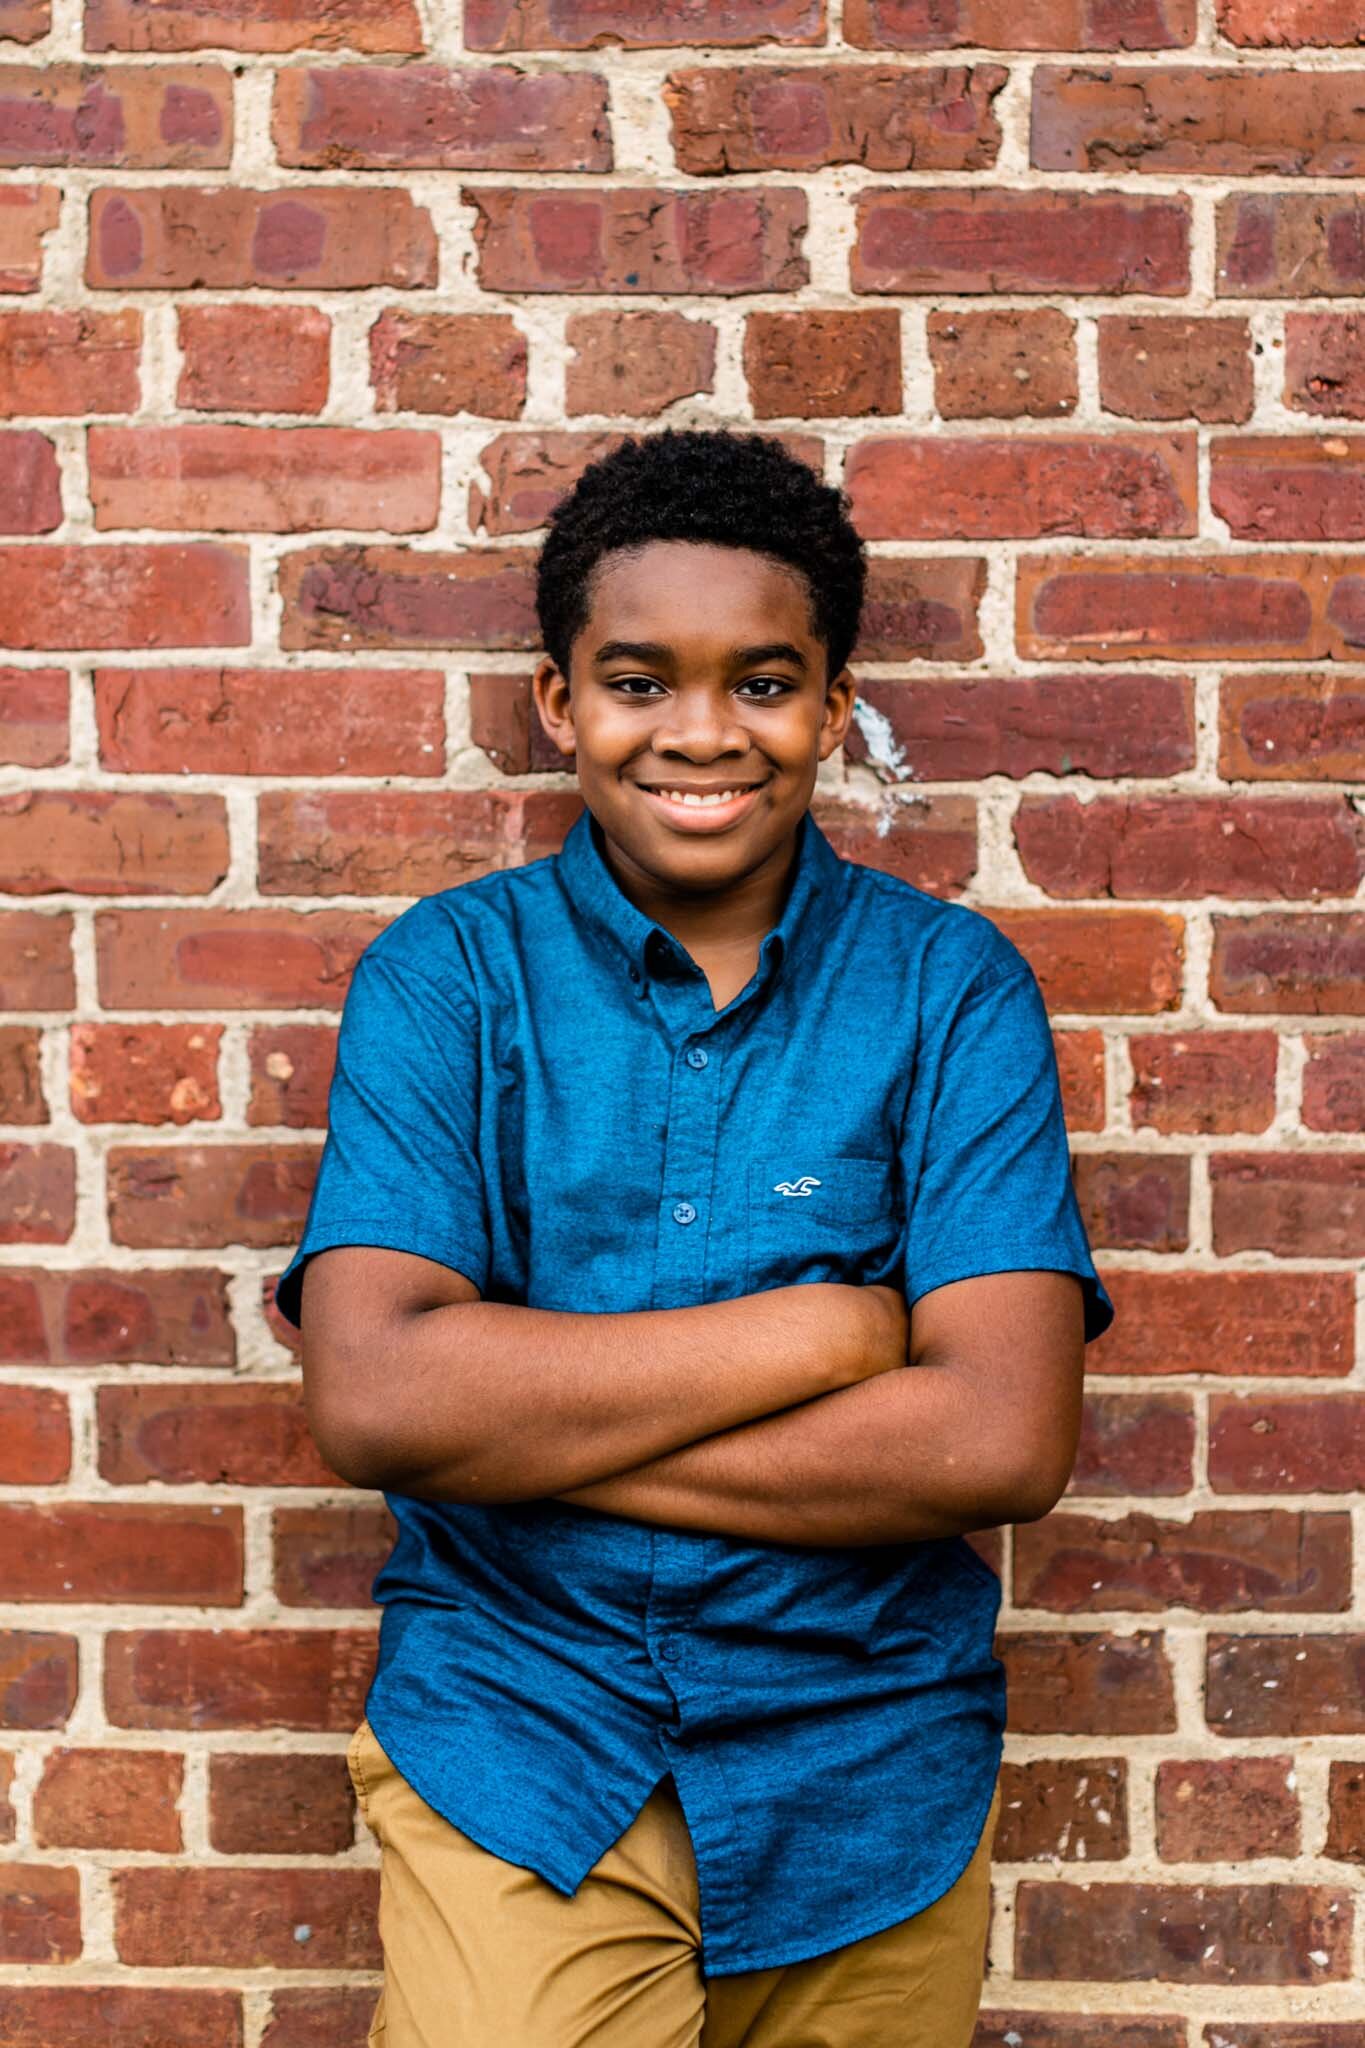 Durham Family Photographer | By G. Lin Photography | Portrait of young boy leaning against brick wall